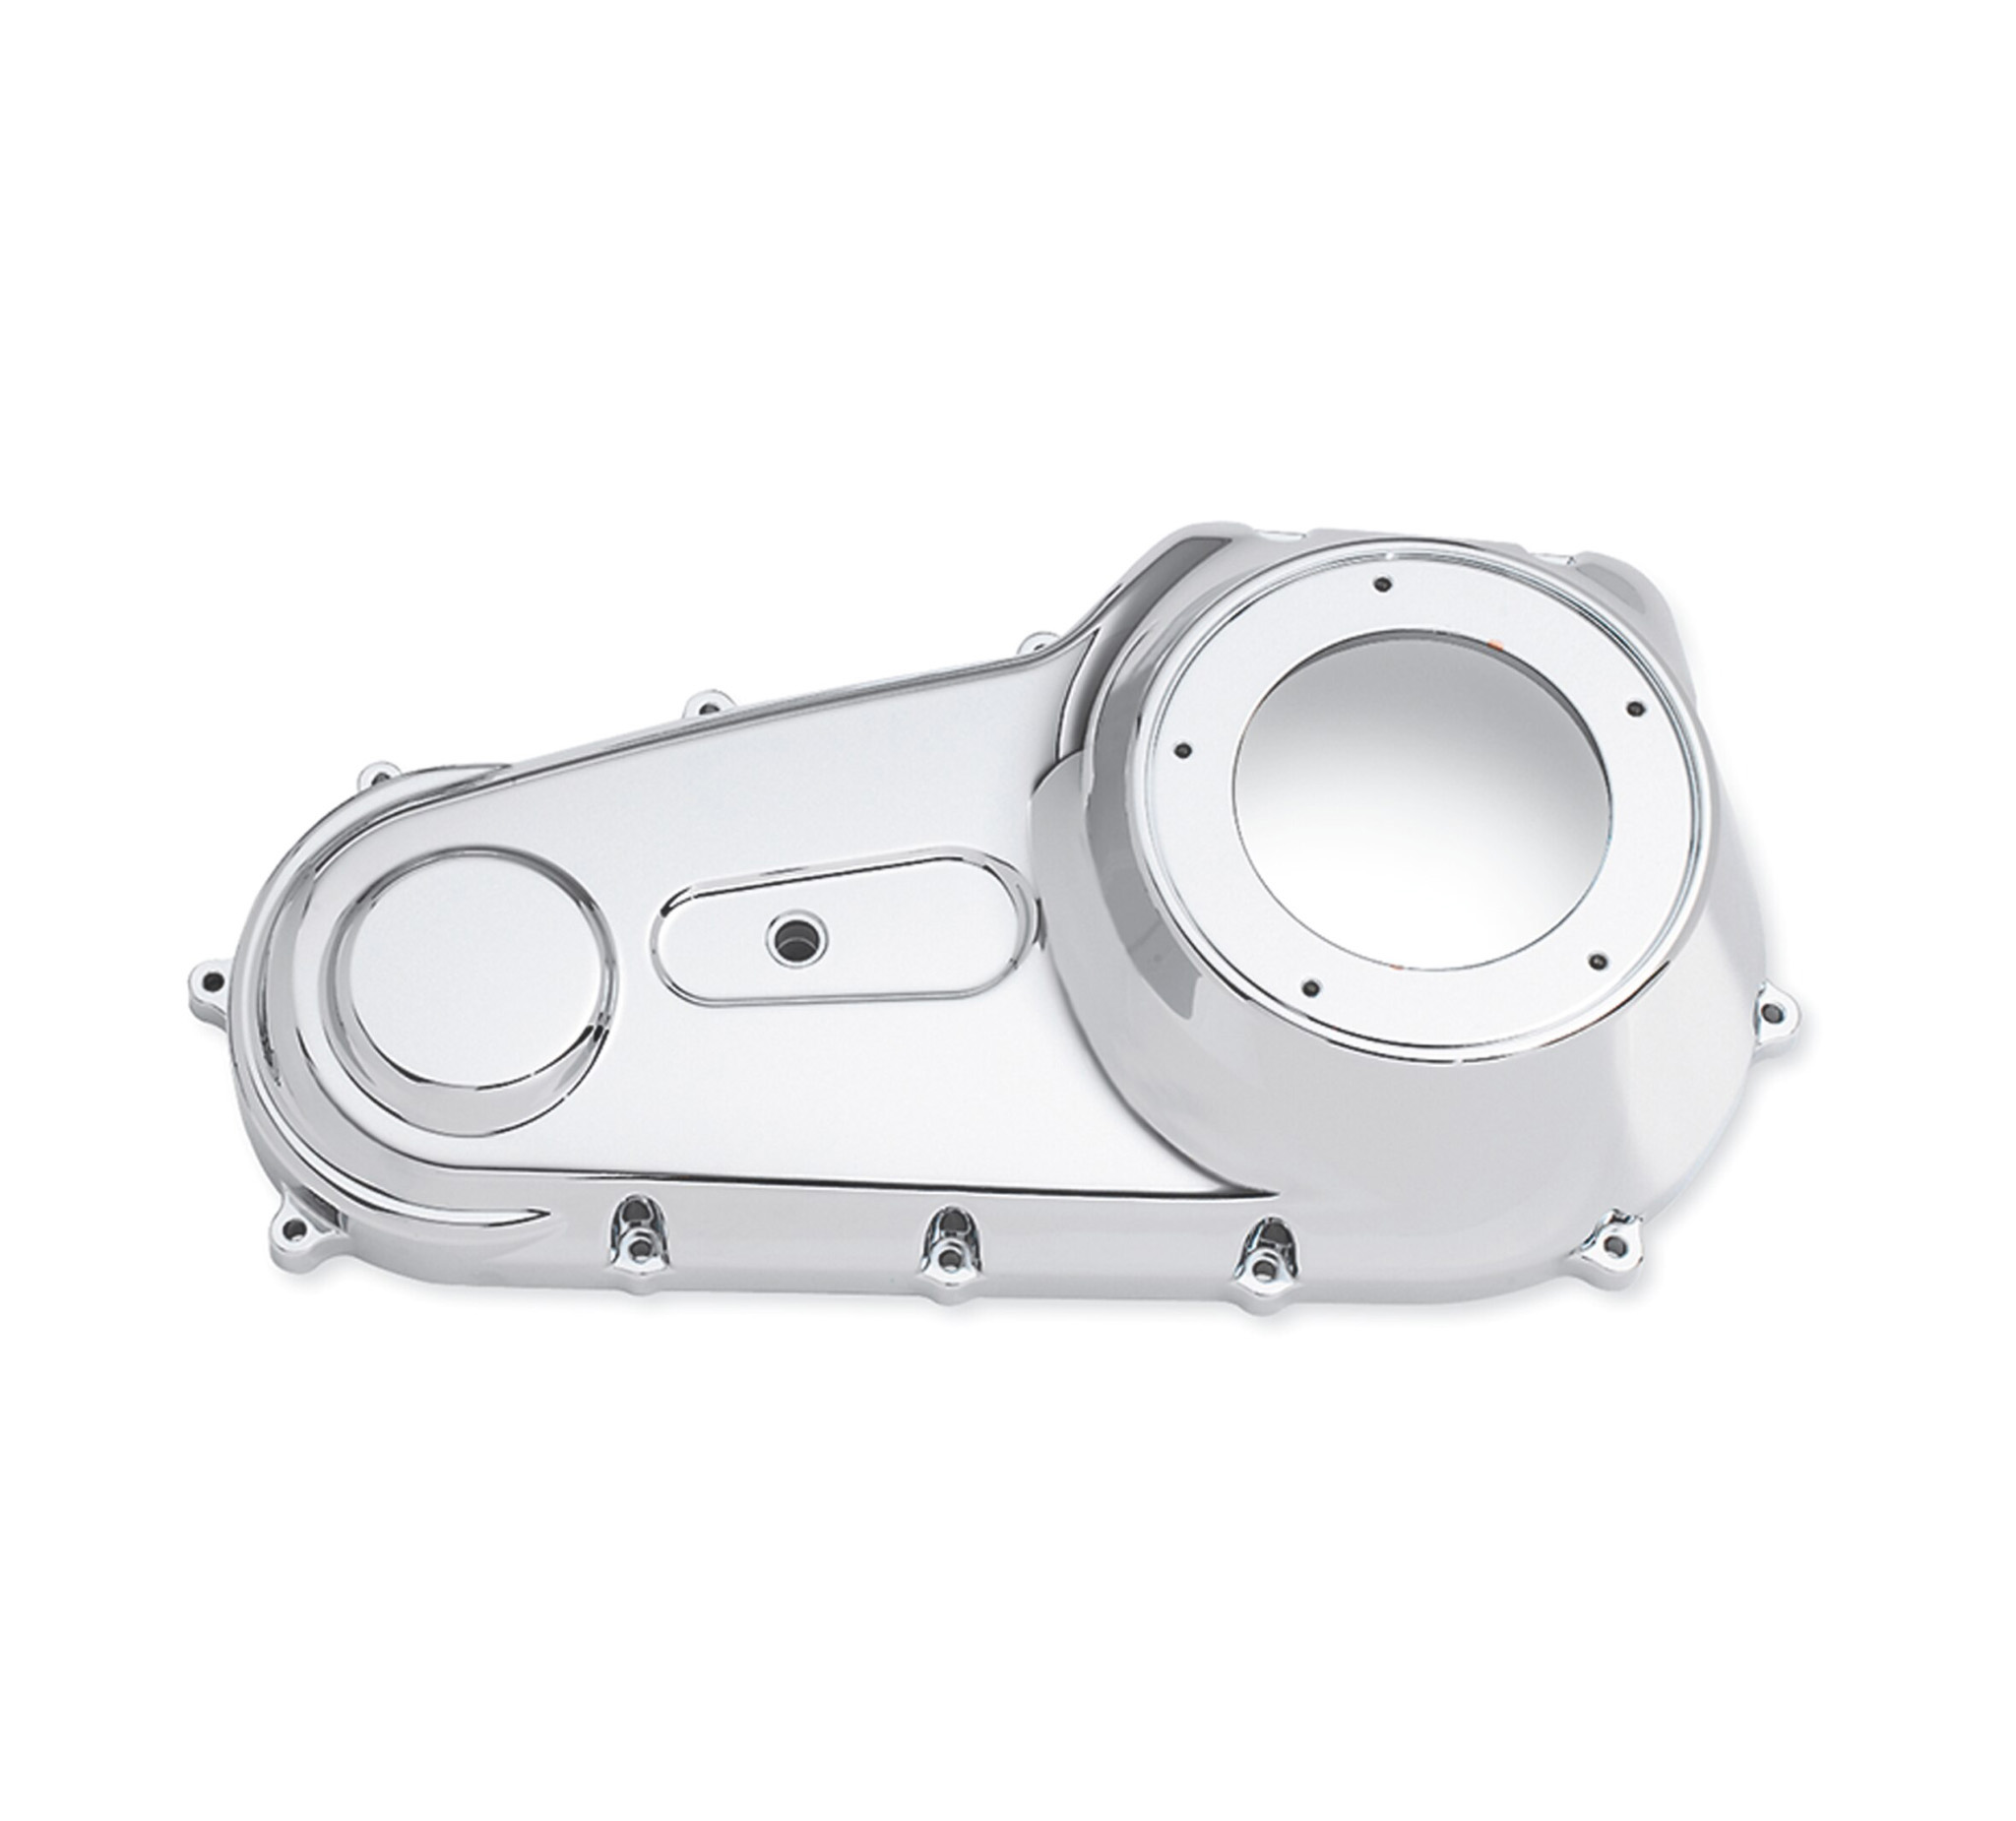 Primary Cover Cap Set Chrome for Harley Davidson by V-Twin